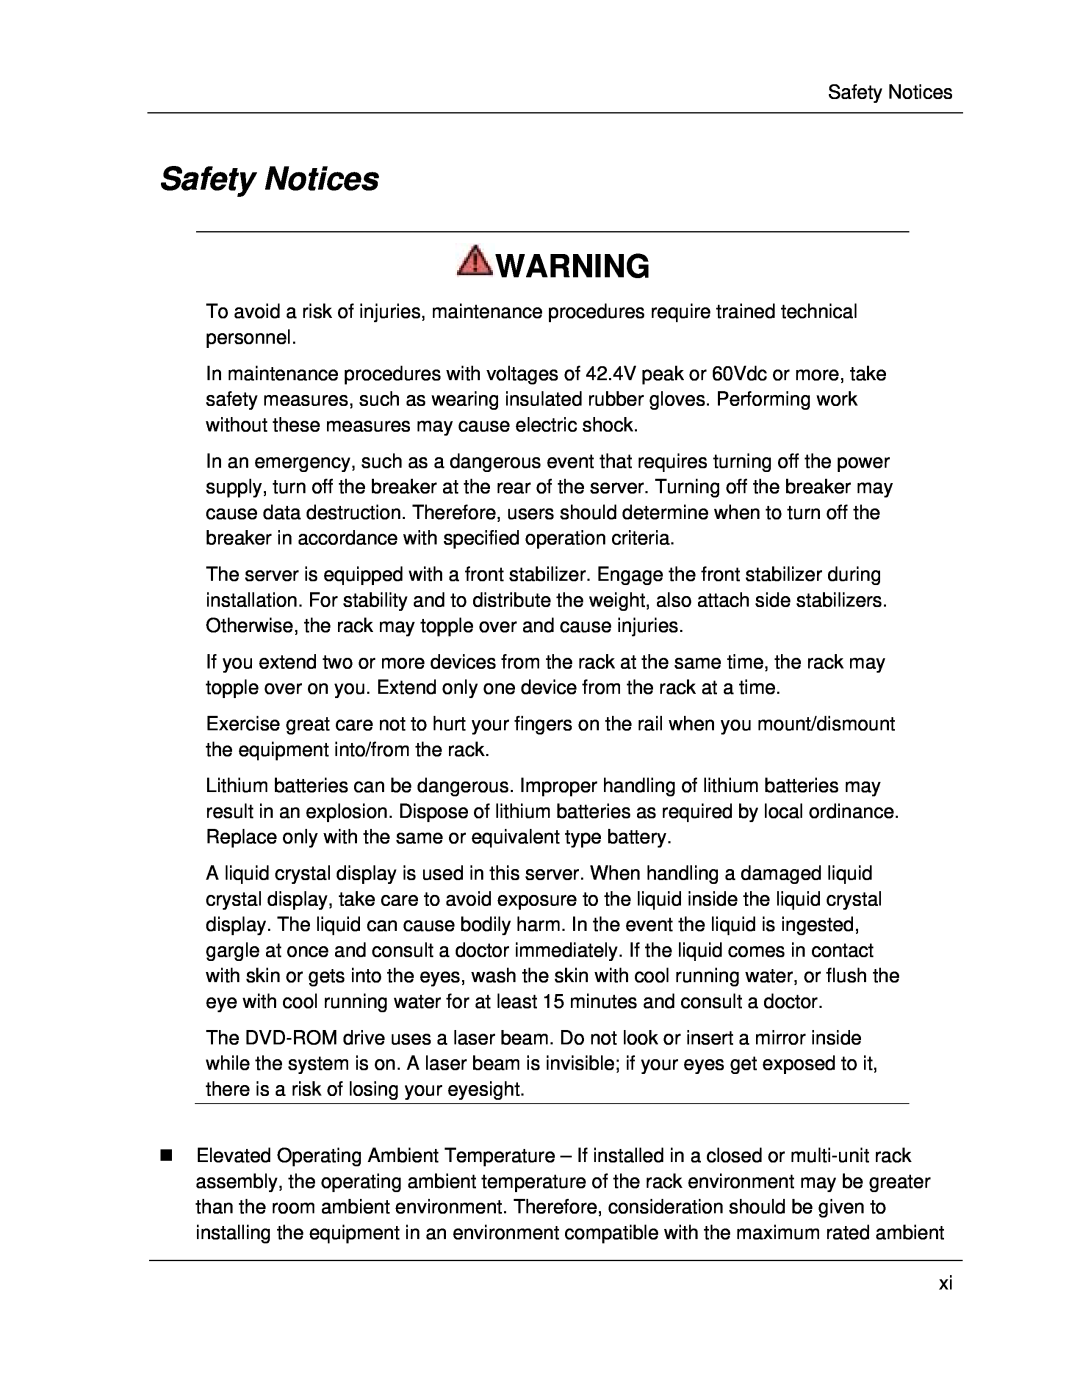 NEC A1160 manual Safety Notices 